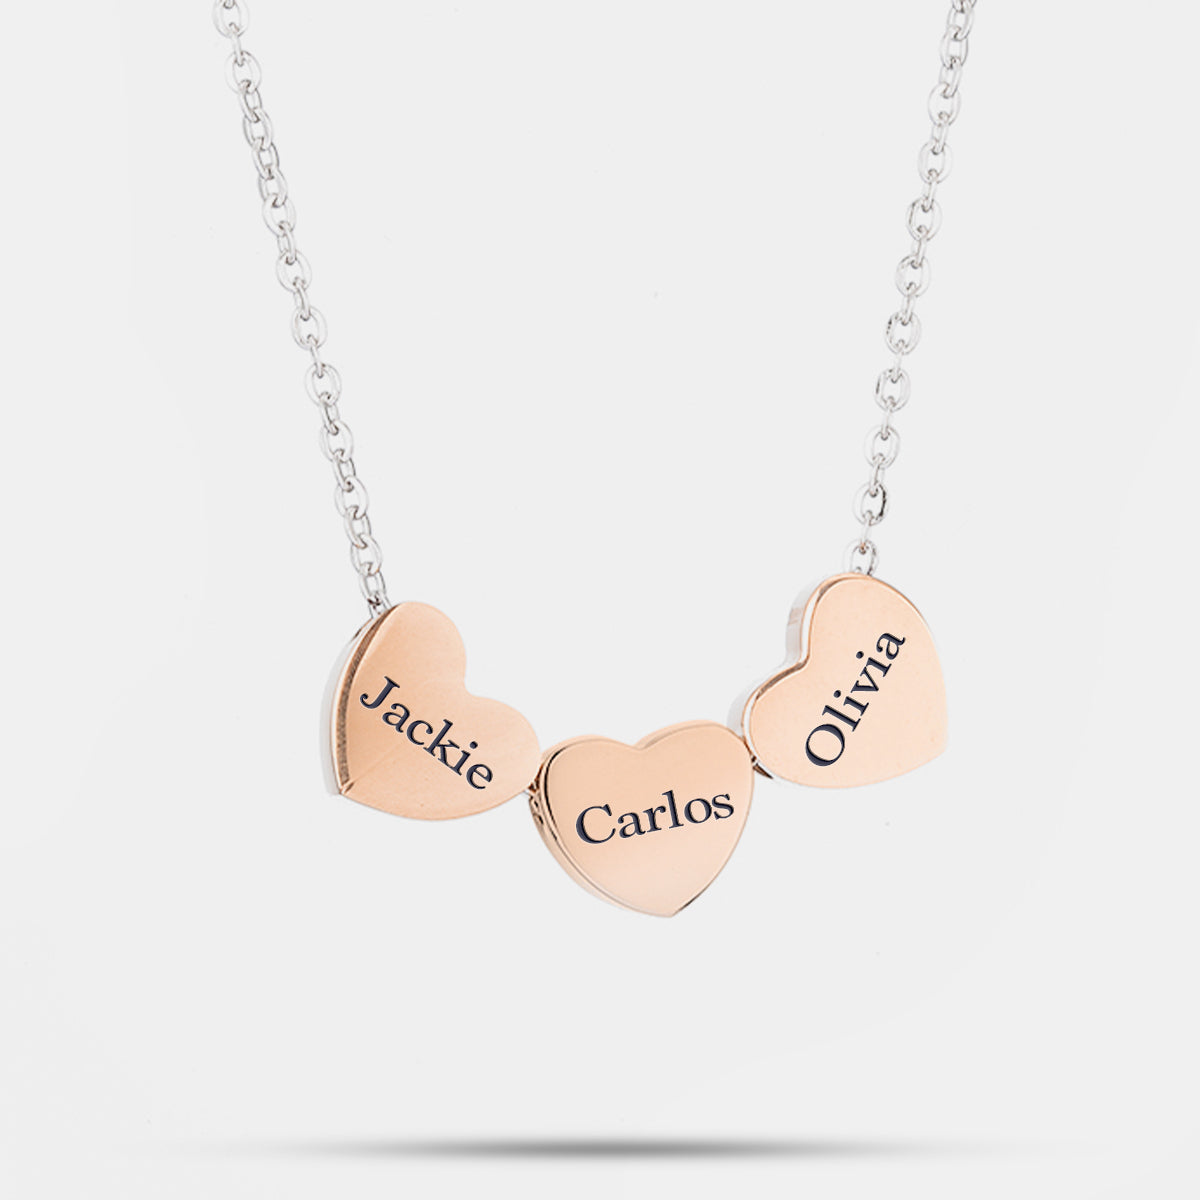 Personalized Three Hearts Necklace with Names